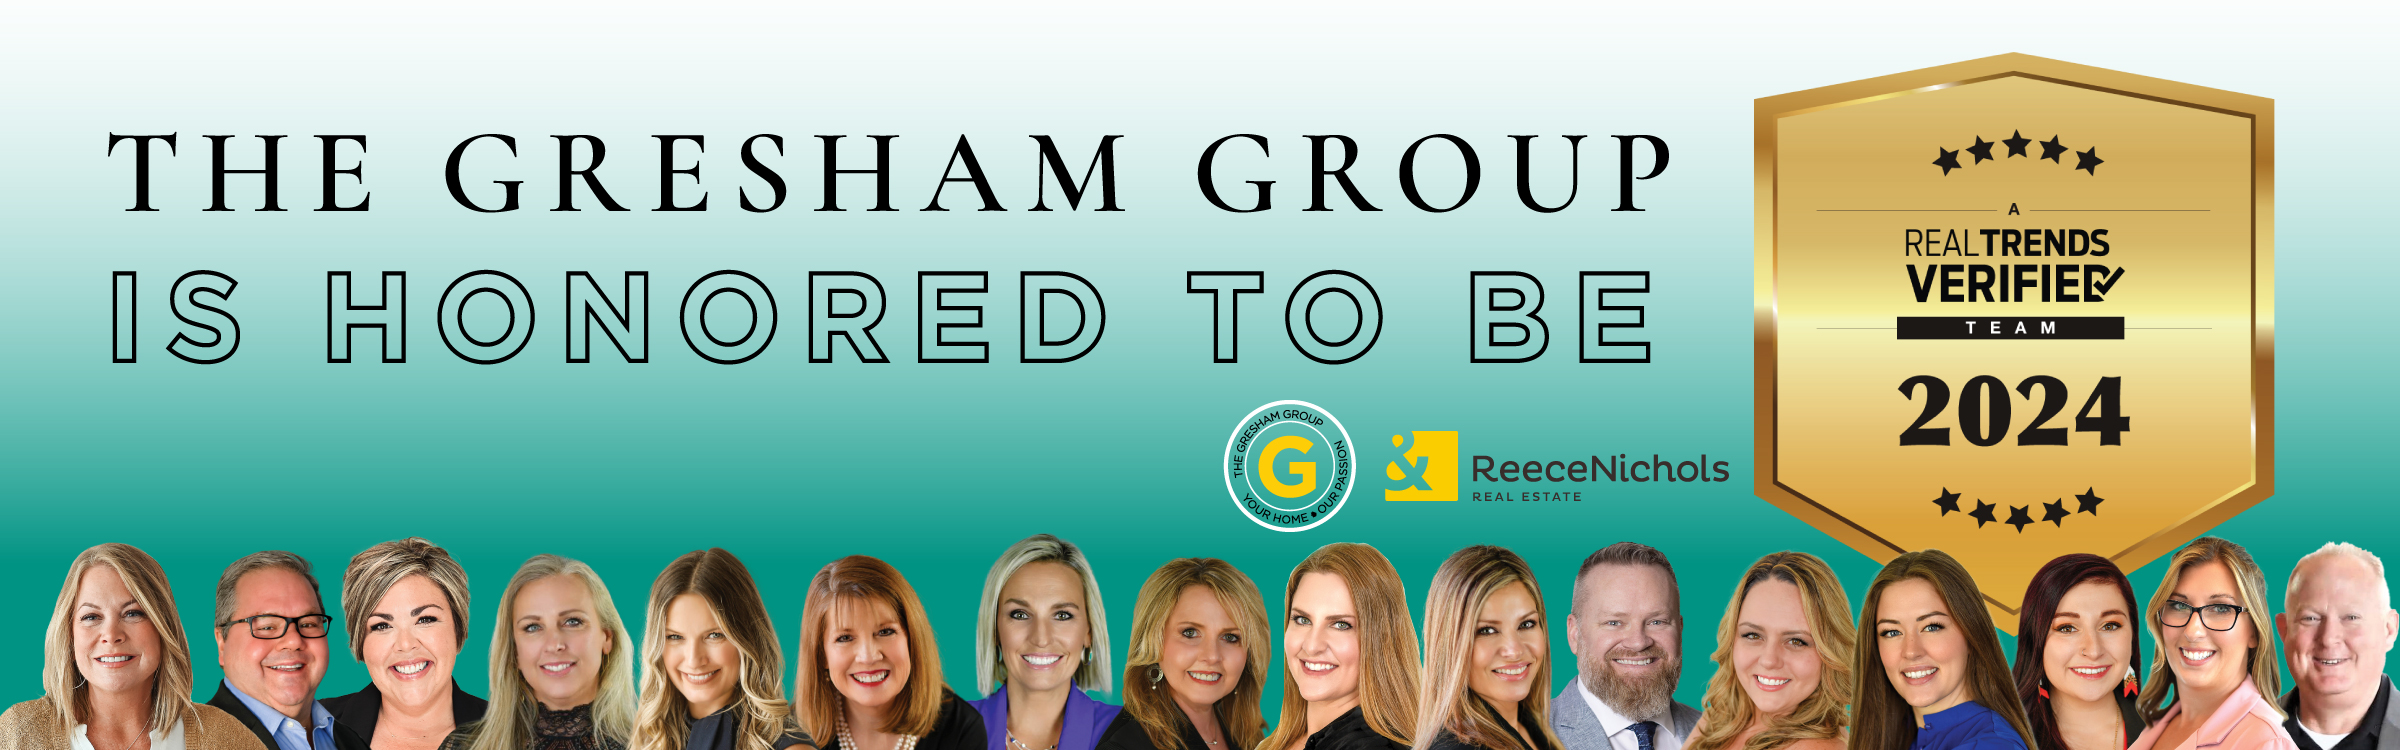 RealTrends Verified - The Gresham Group